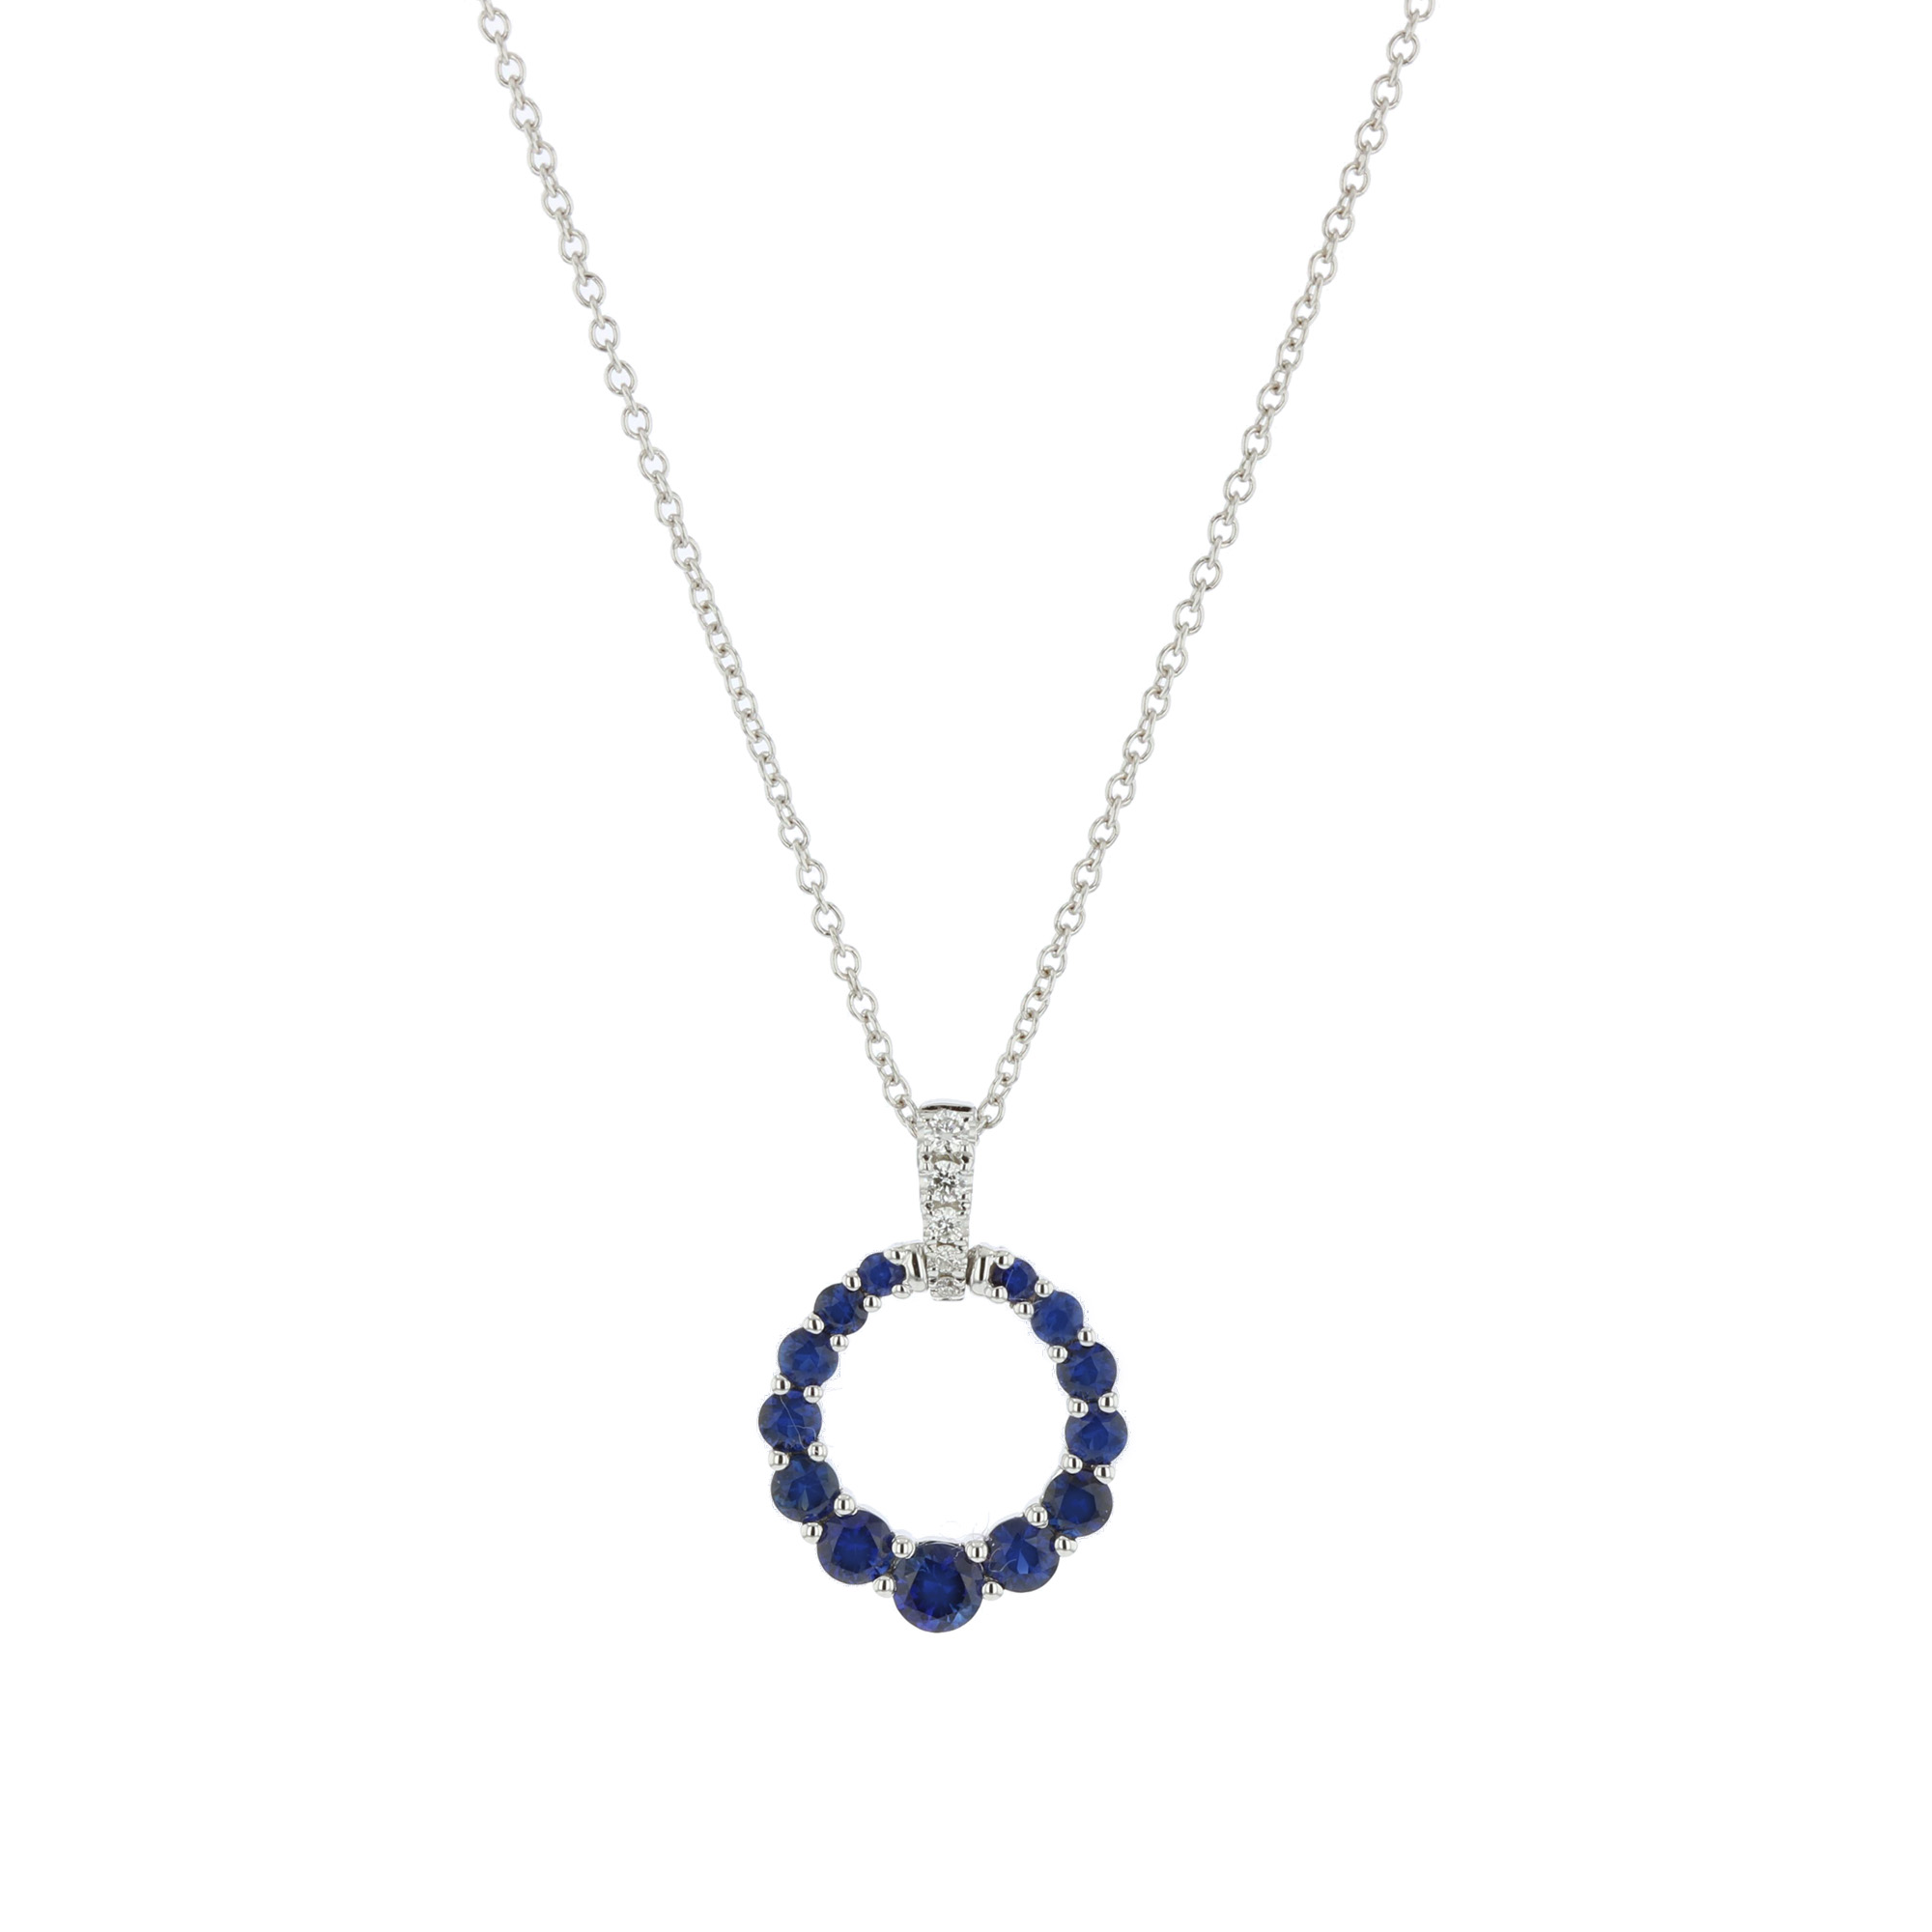 View 0.05ctw Diamond and Sapphire Circlle Pendant in 18k White Gold